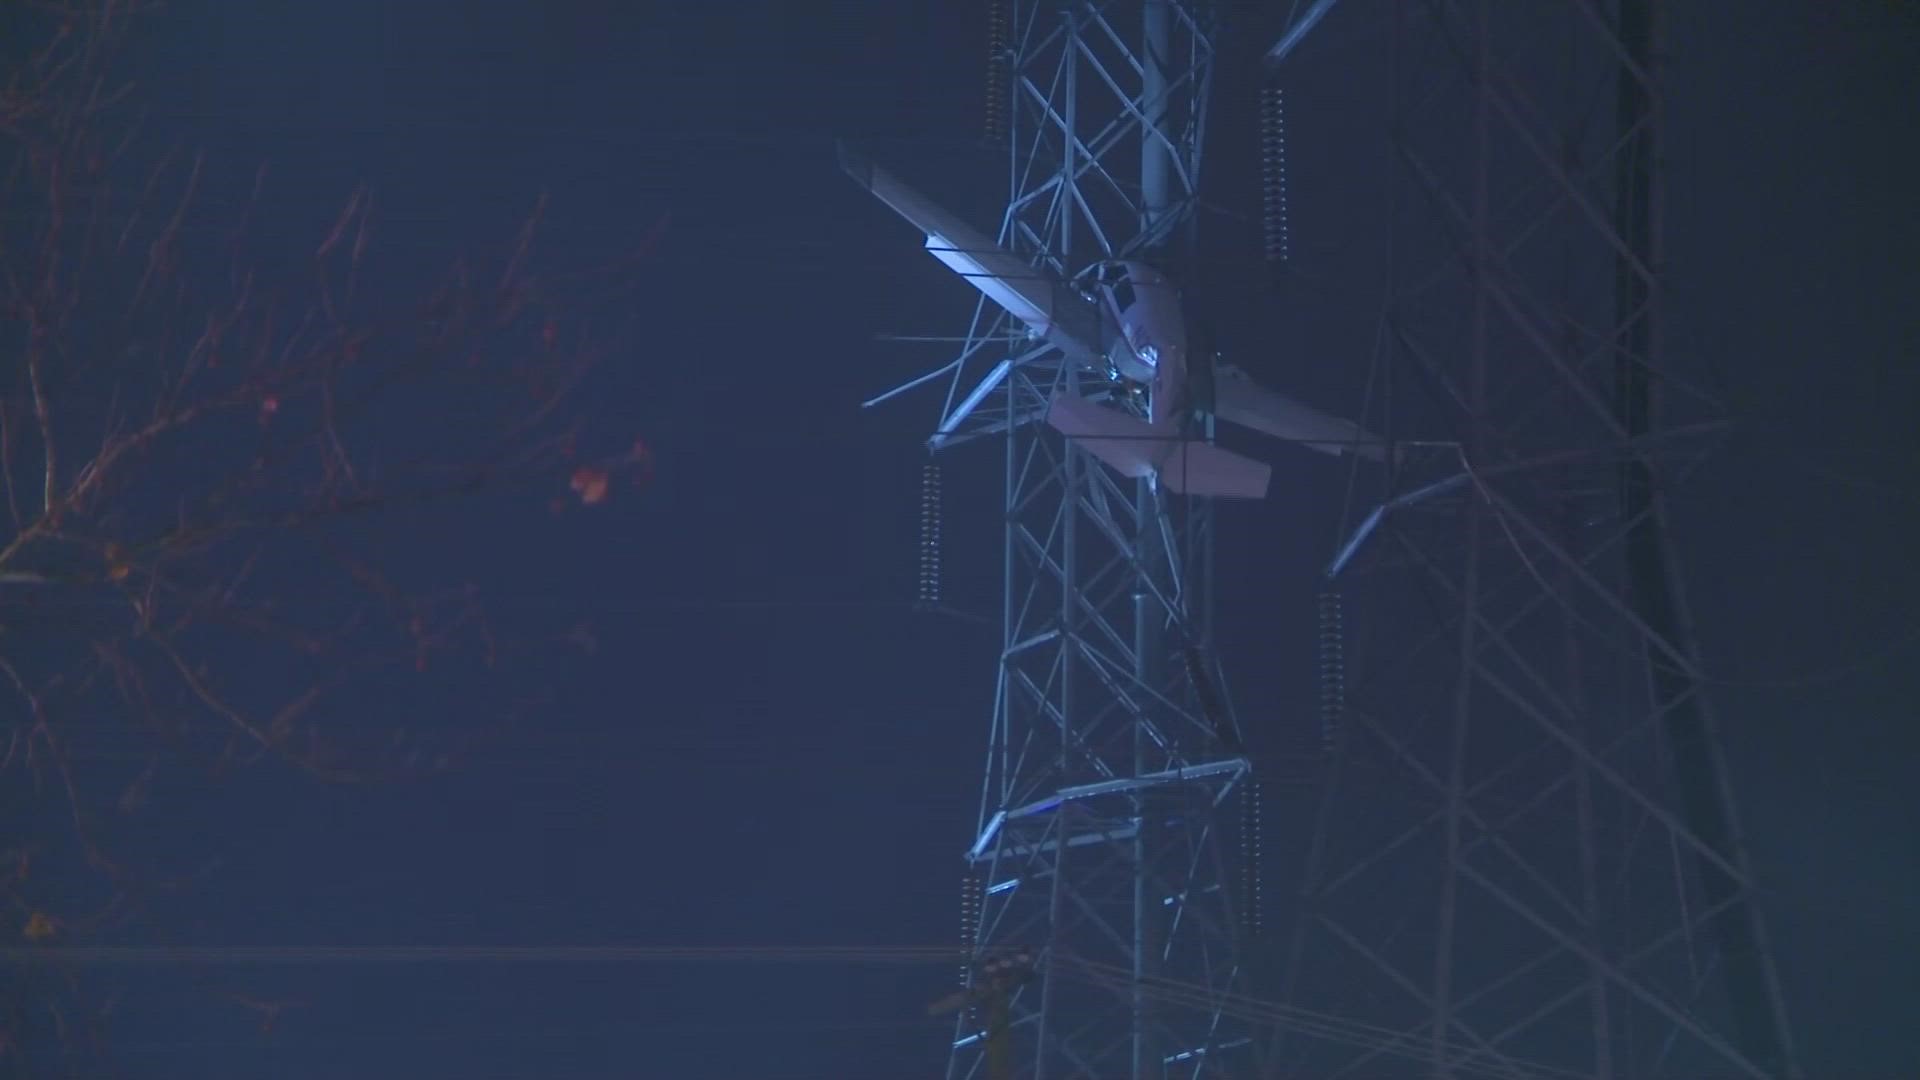 At the scene, the small plane was seen dangling 100 feet in the air in a Pepco tower.